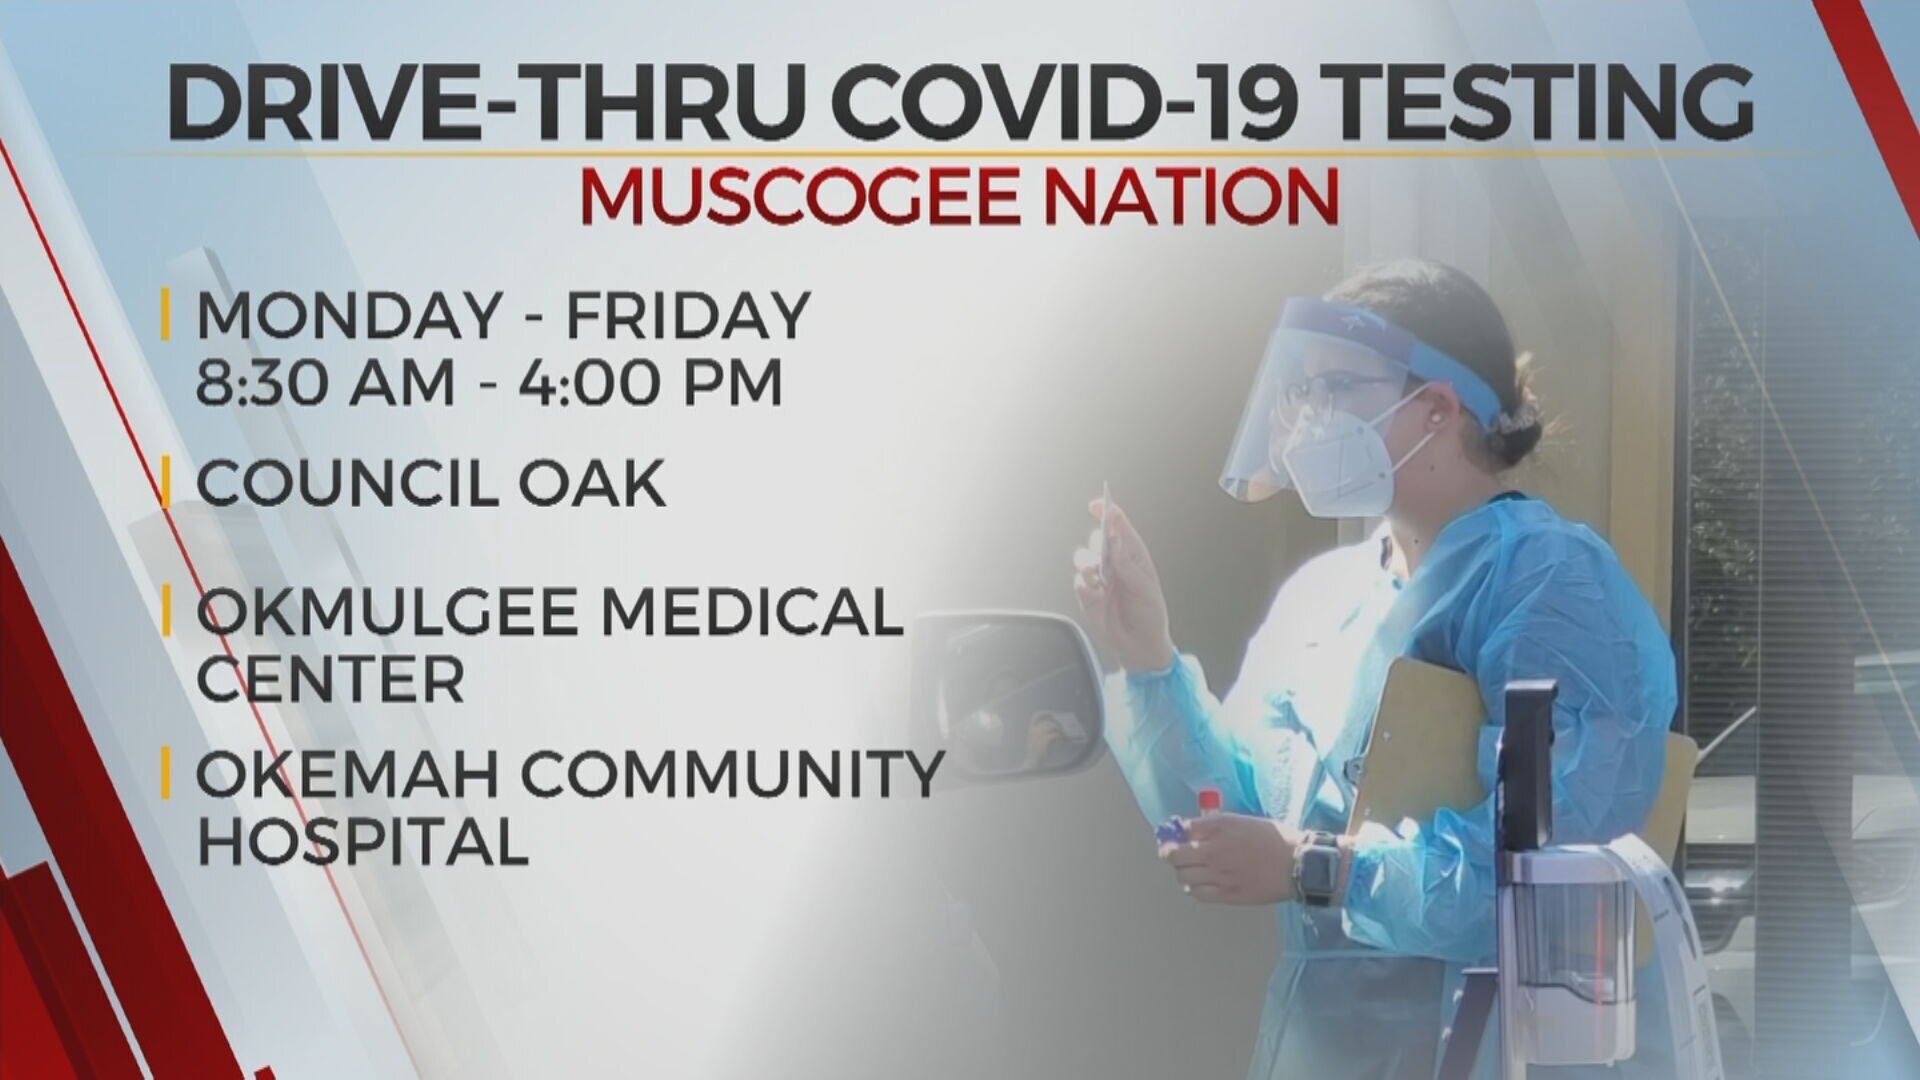 Muscogee Nation Offers Drive-Thru COVID-19 Testing